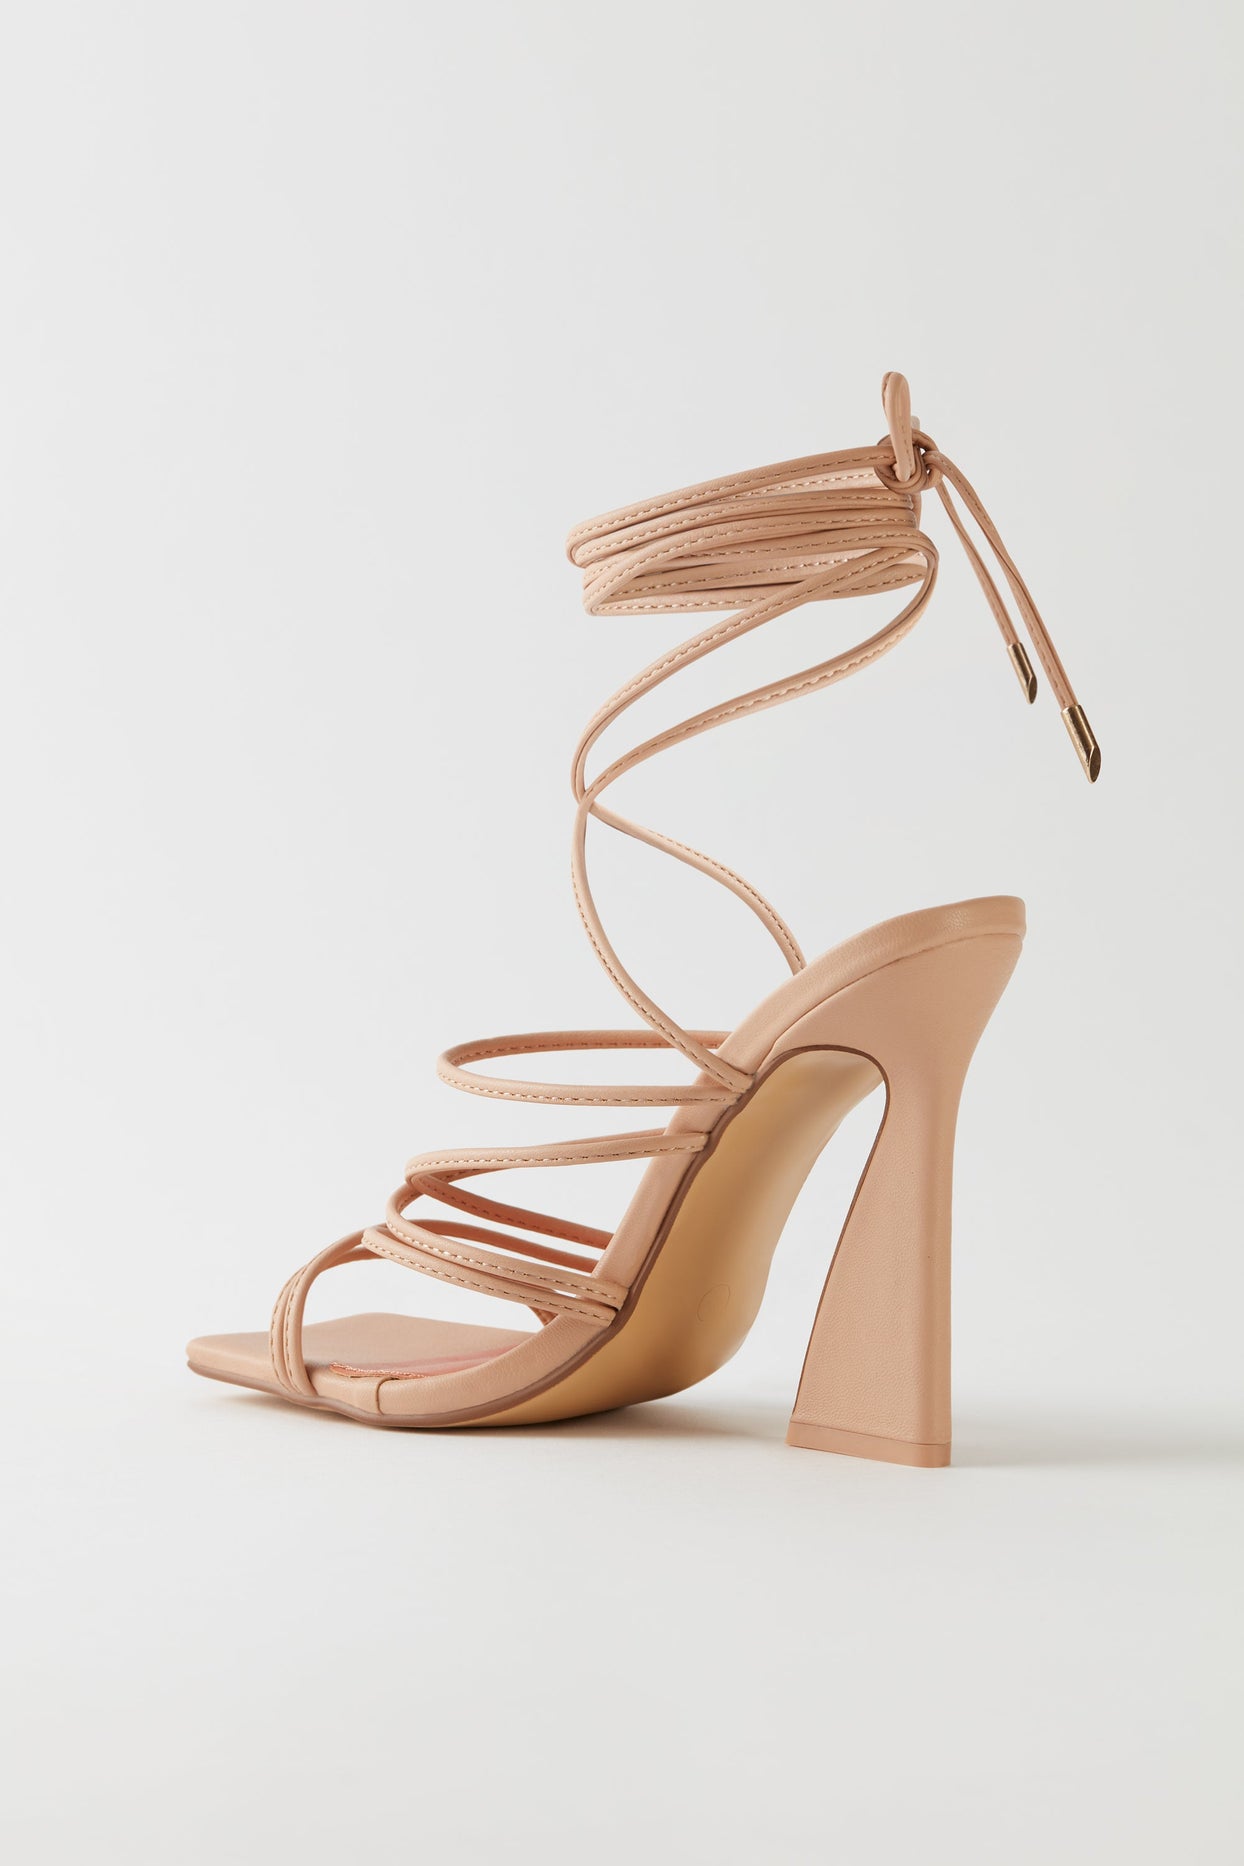 Leatherette Lace Up Heels in Nude